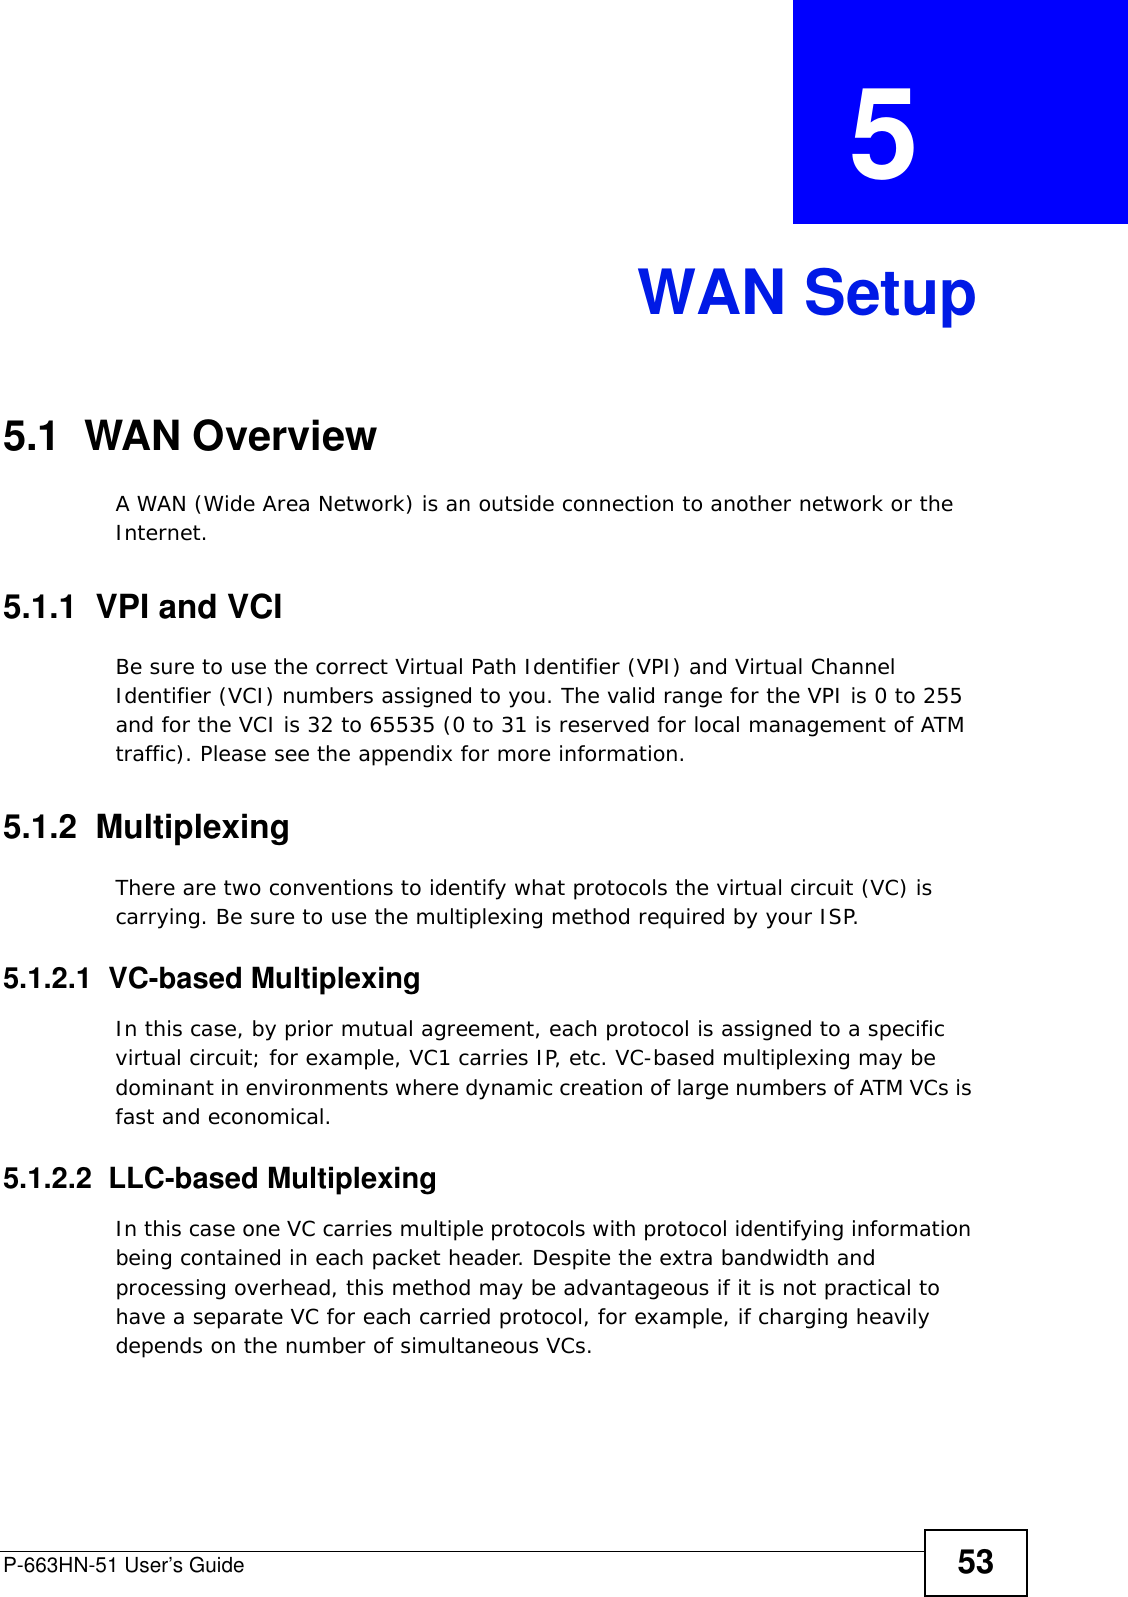 P-663HN-51 User’s Guide 53CHAPTER  5 WAN Setup5.1  WAN Overview A WAN (Wide Area Network) is an outside connection to another network or the Internet.5.1.1  VPI and VCIBe sure to use the correct Virtual Path Identifier (VPI) and Virtual Channel Identifier (VCI) numbers assigned to you. The valid range for the VPI is 0 to 255 and for the VCI is 32 to 65535 (0 to 31 is reserved for local management of ATM traffic). Please see the appendix for more information.5.1.2  MultiplexingThere are two conventions to identify what protocols the virtual circuit (VC) is carrying. Be sure to use the multiplexing method required by your ISP.5.1.2.1  VC-based MultiplexingIn this case, by prior mutual agreement, each protocol is assigned to a specific virtual circuit; for example, VC1 carries IP, etc. VC-based multiplexing may be dominant in environments where dynamic creation of large numbers of ATM VCs is fast and economical.5.1.2.2  LLC-based MultiplexingIn this case one VC carries multiple protocols with protocol identifying information being contained in each packet header. Despite the extra bandwidth and processing overhead, this method may be advantageous if it is not practical to have a separate VC for each carried protocol, for example, if charging heavily depends on the number of simultaneous VCs.